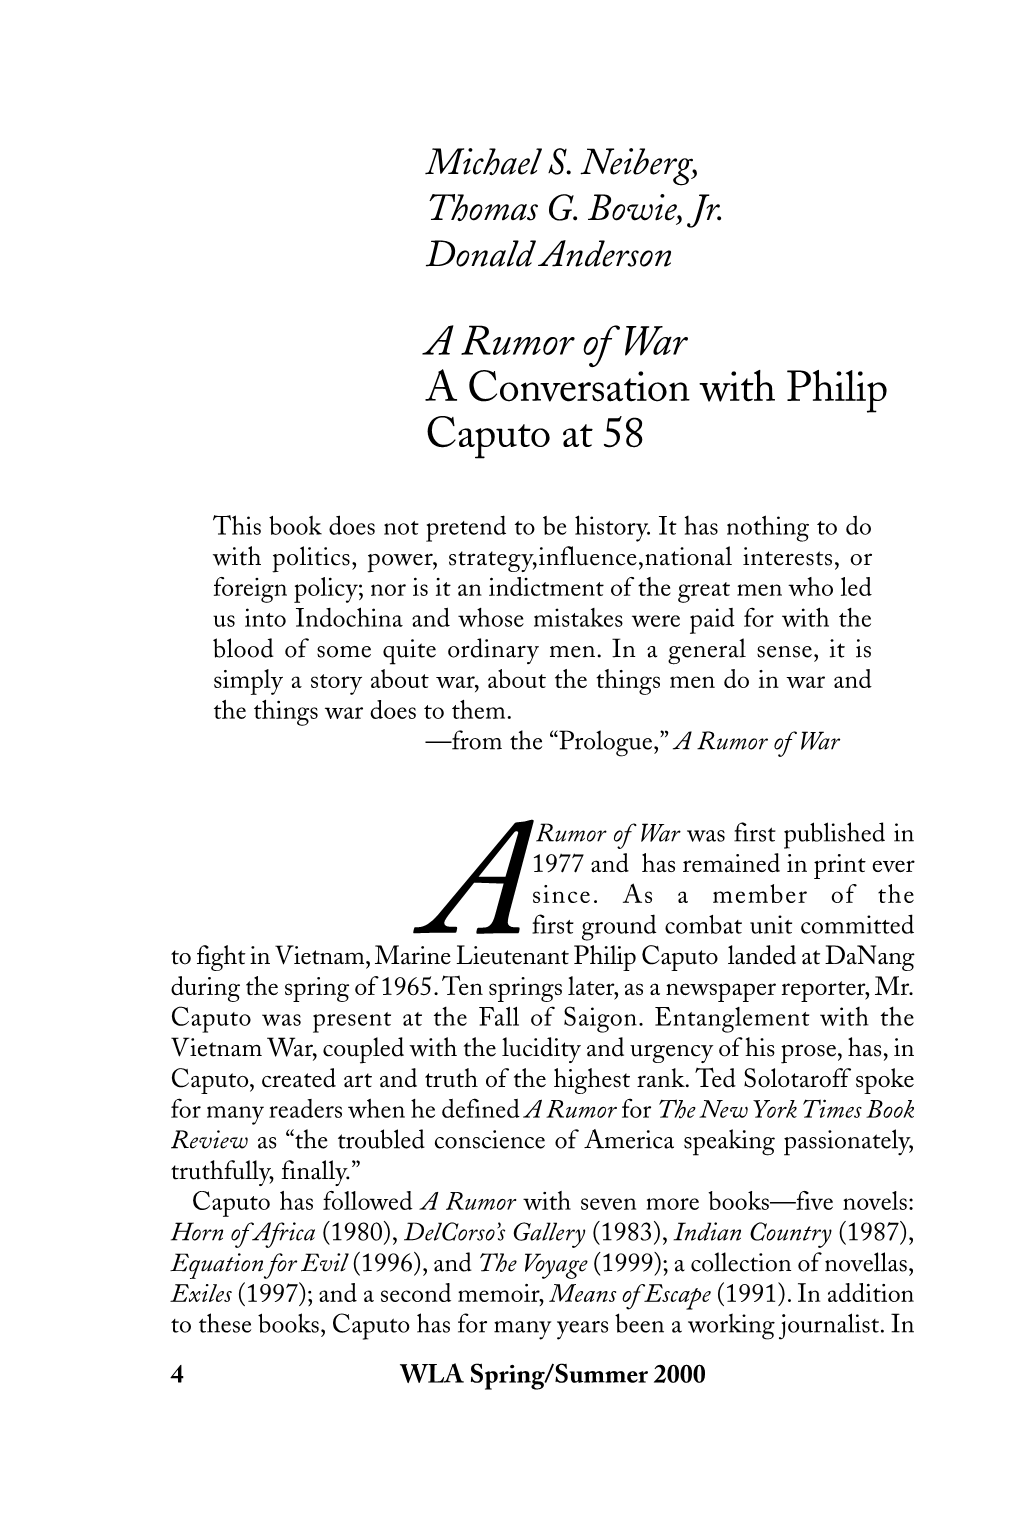 A Rumor of War a Conversation with Philip Caputo at 58